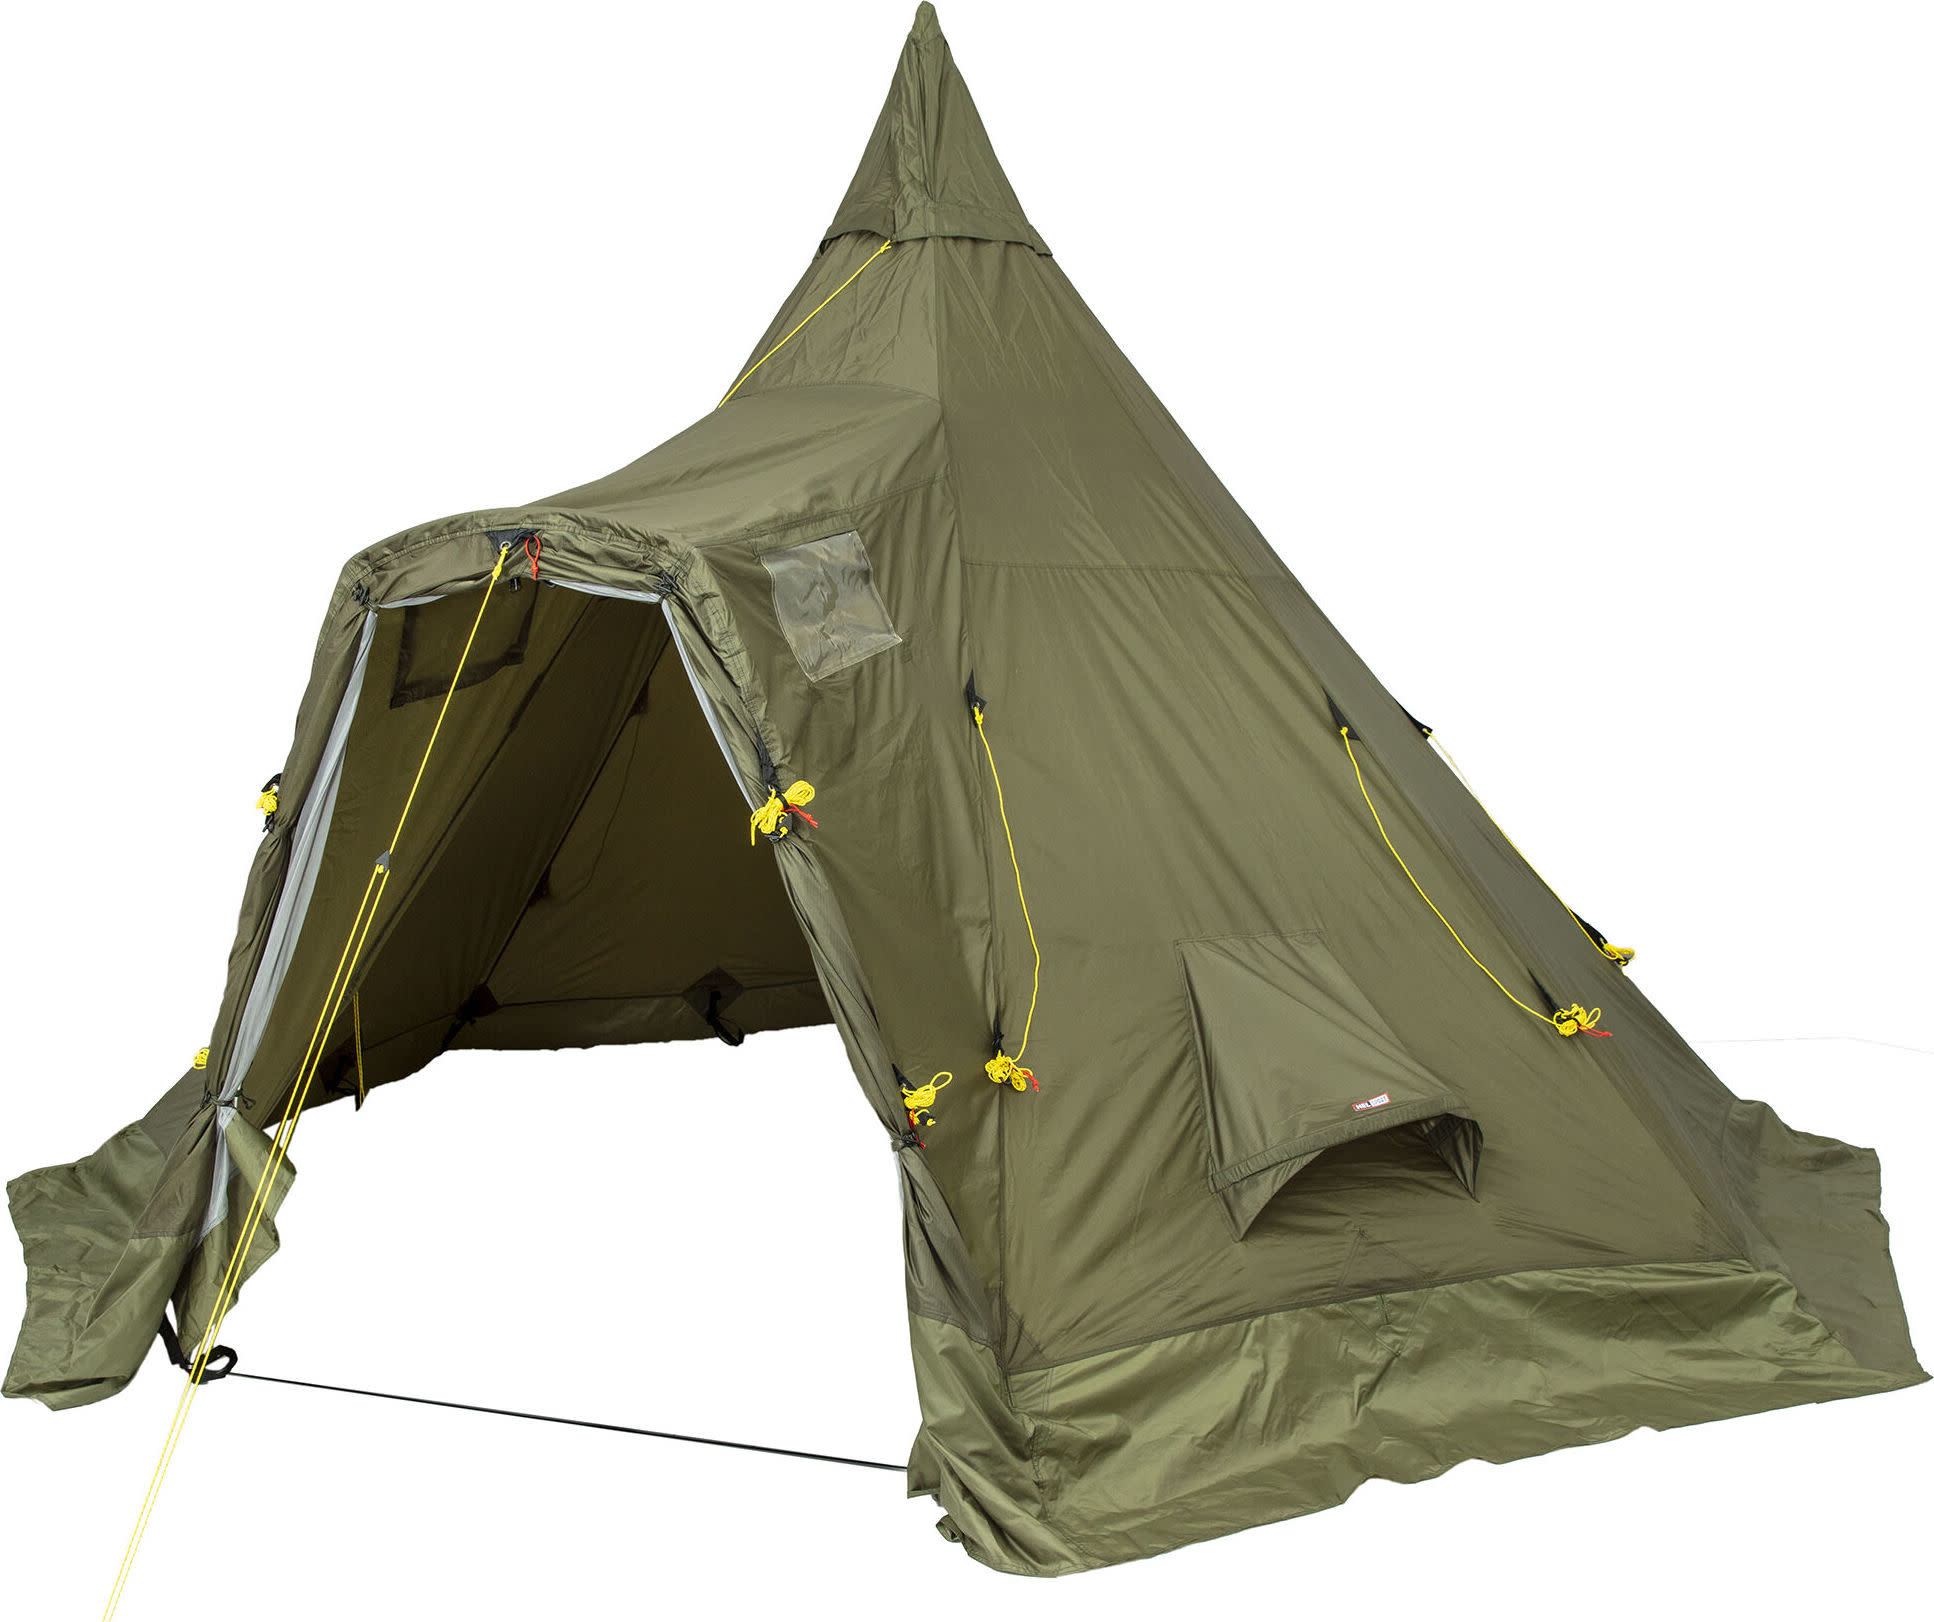 Varanger 8-10 Camp Outer Tent Incl. Pole green